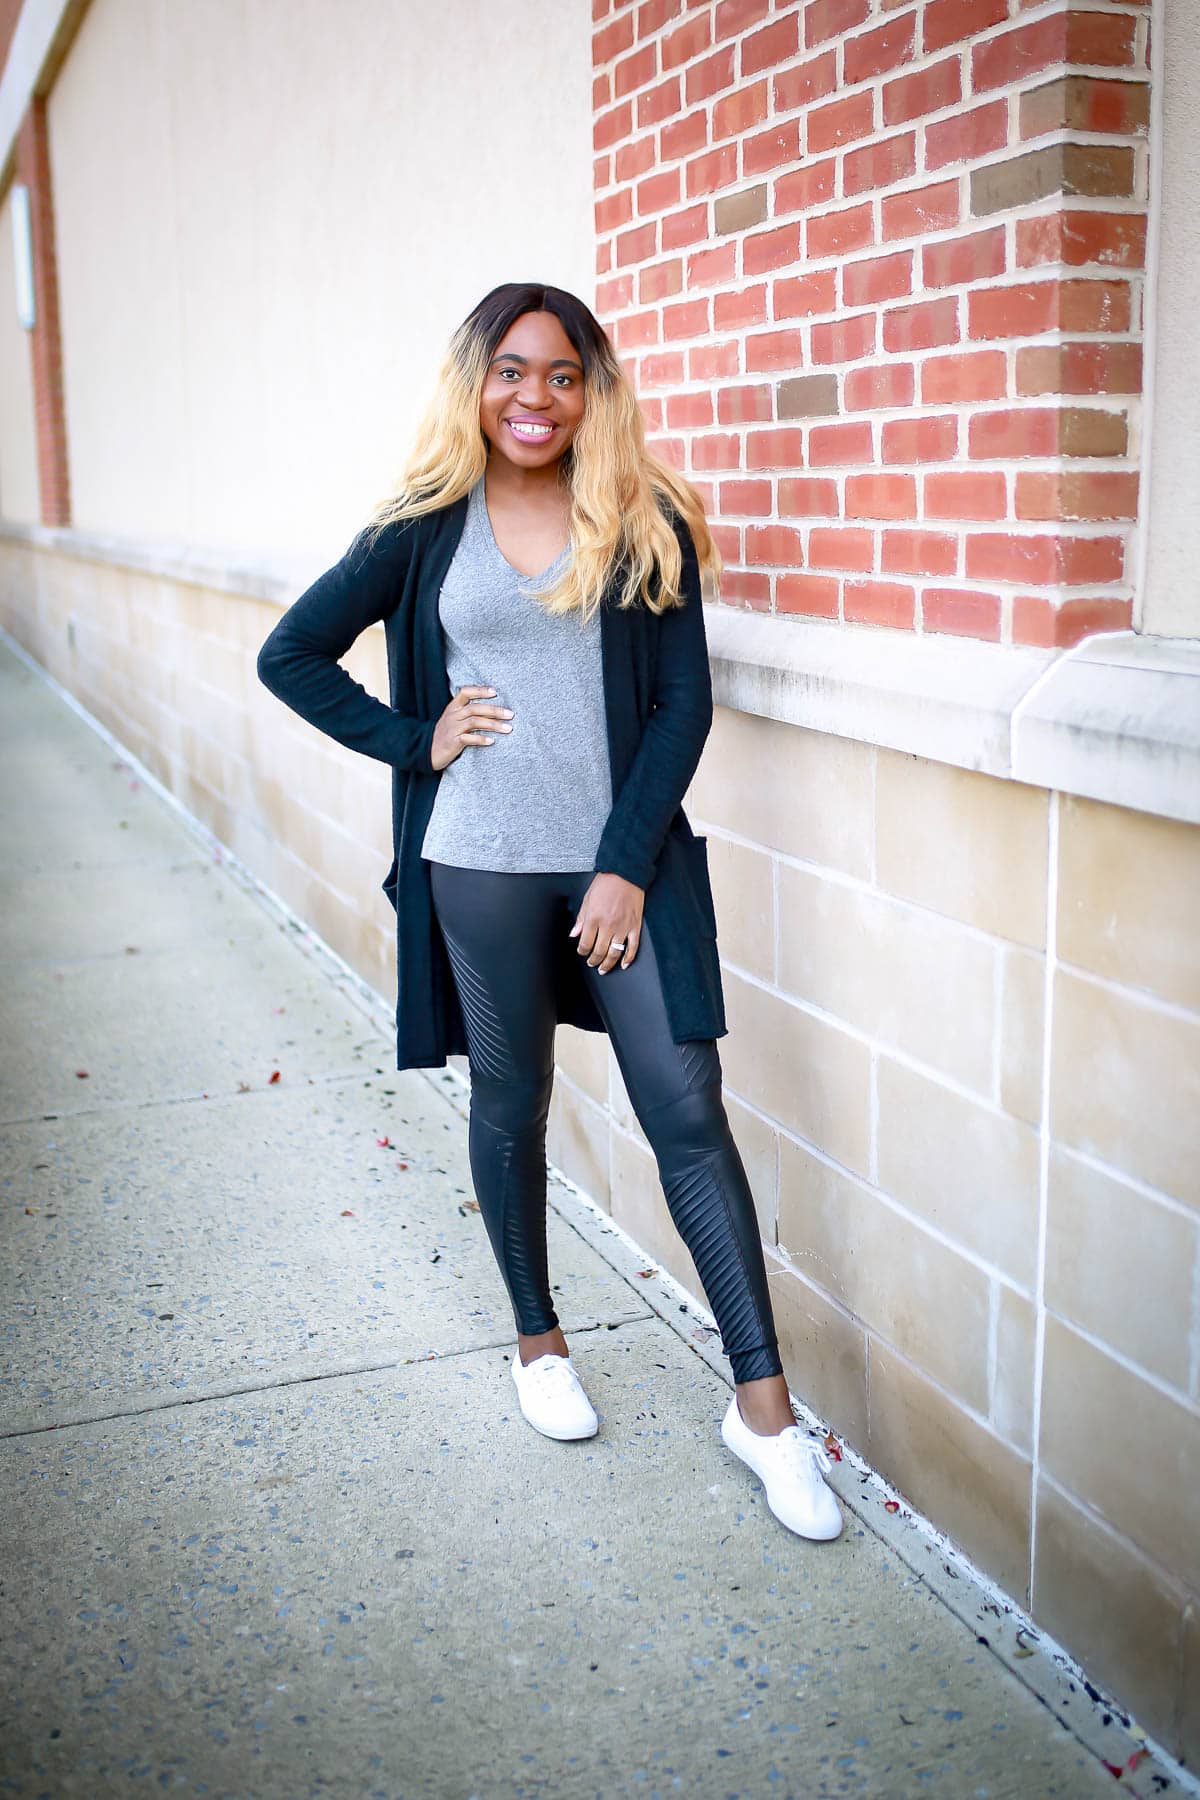 Spanx faux leather leggings review | Is this Spanx leggings worth the money? I bought this Moto leggings and share my thoughts in this review. Keep reading to get the scoop on if this leggings is worth the hype or a waste of money.